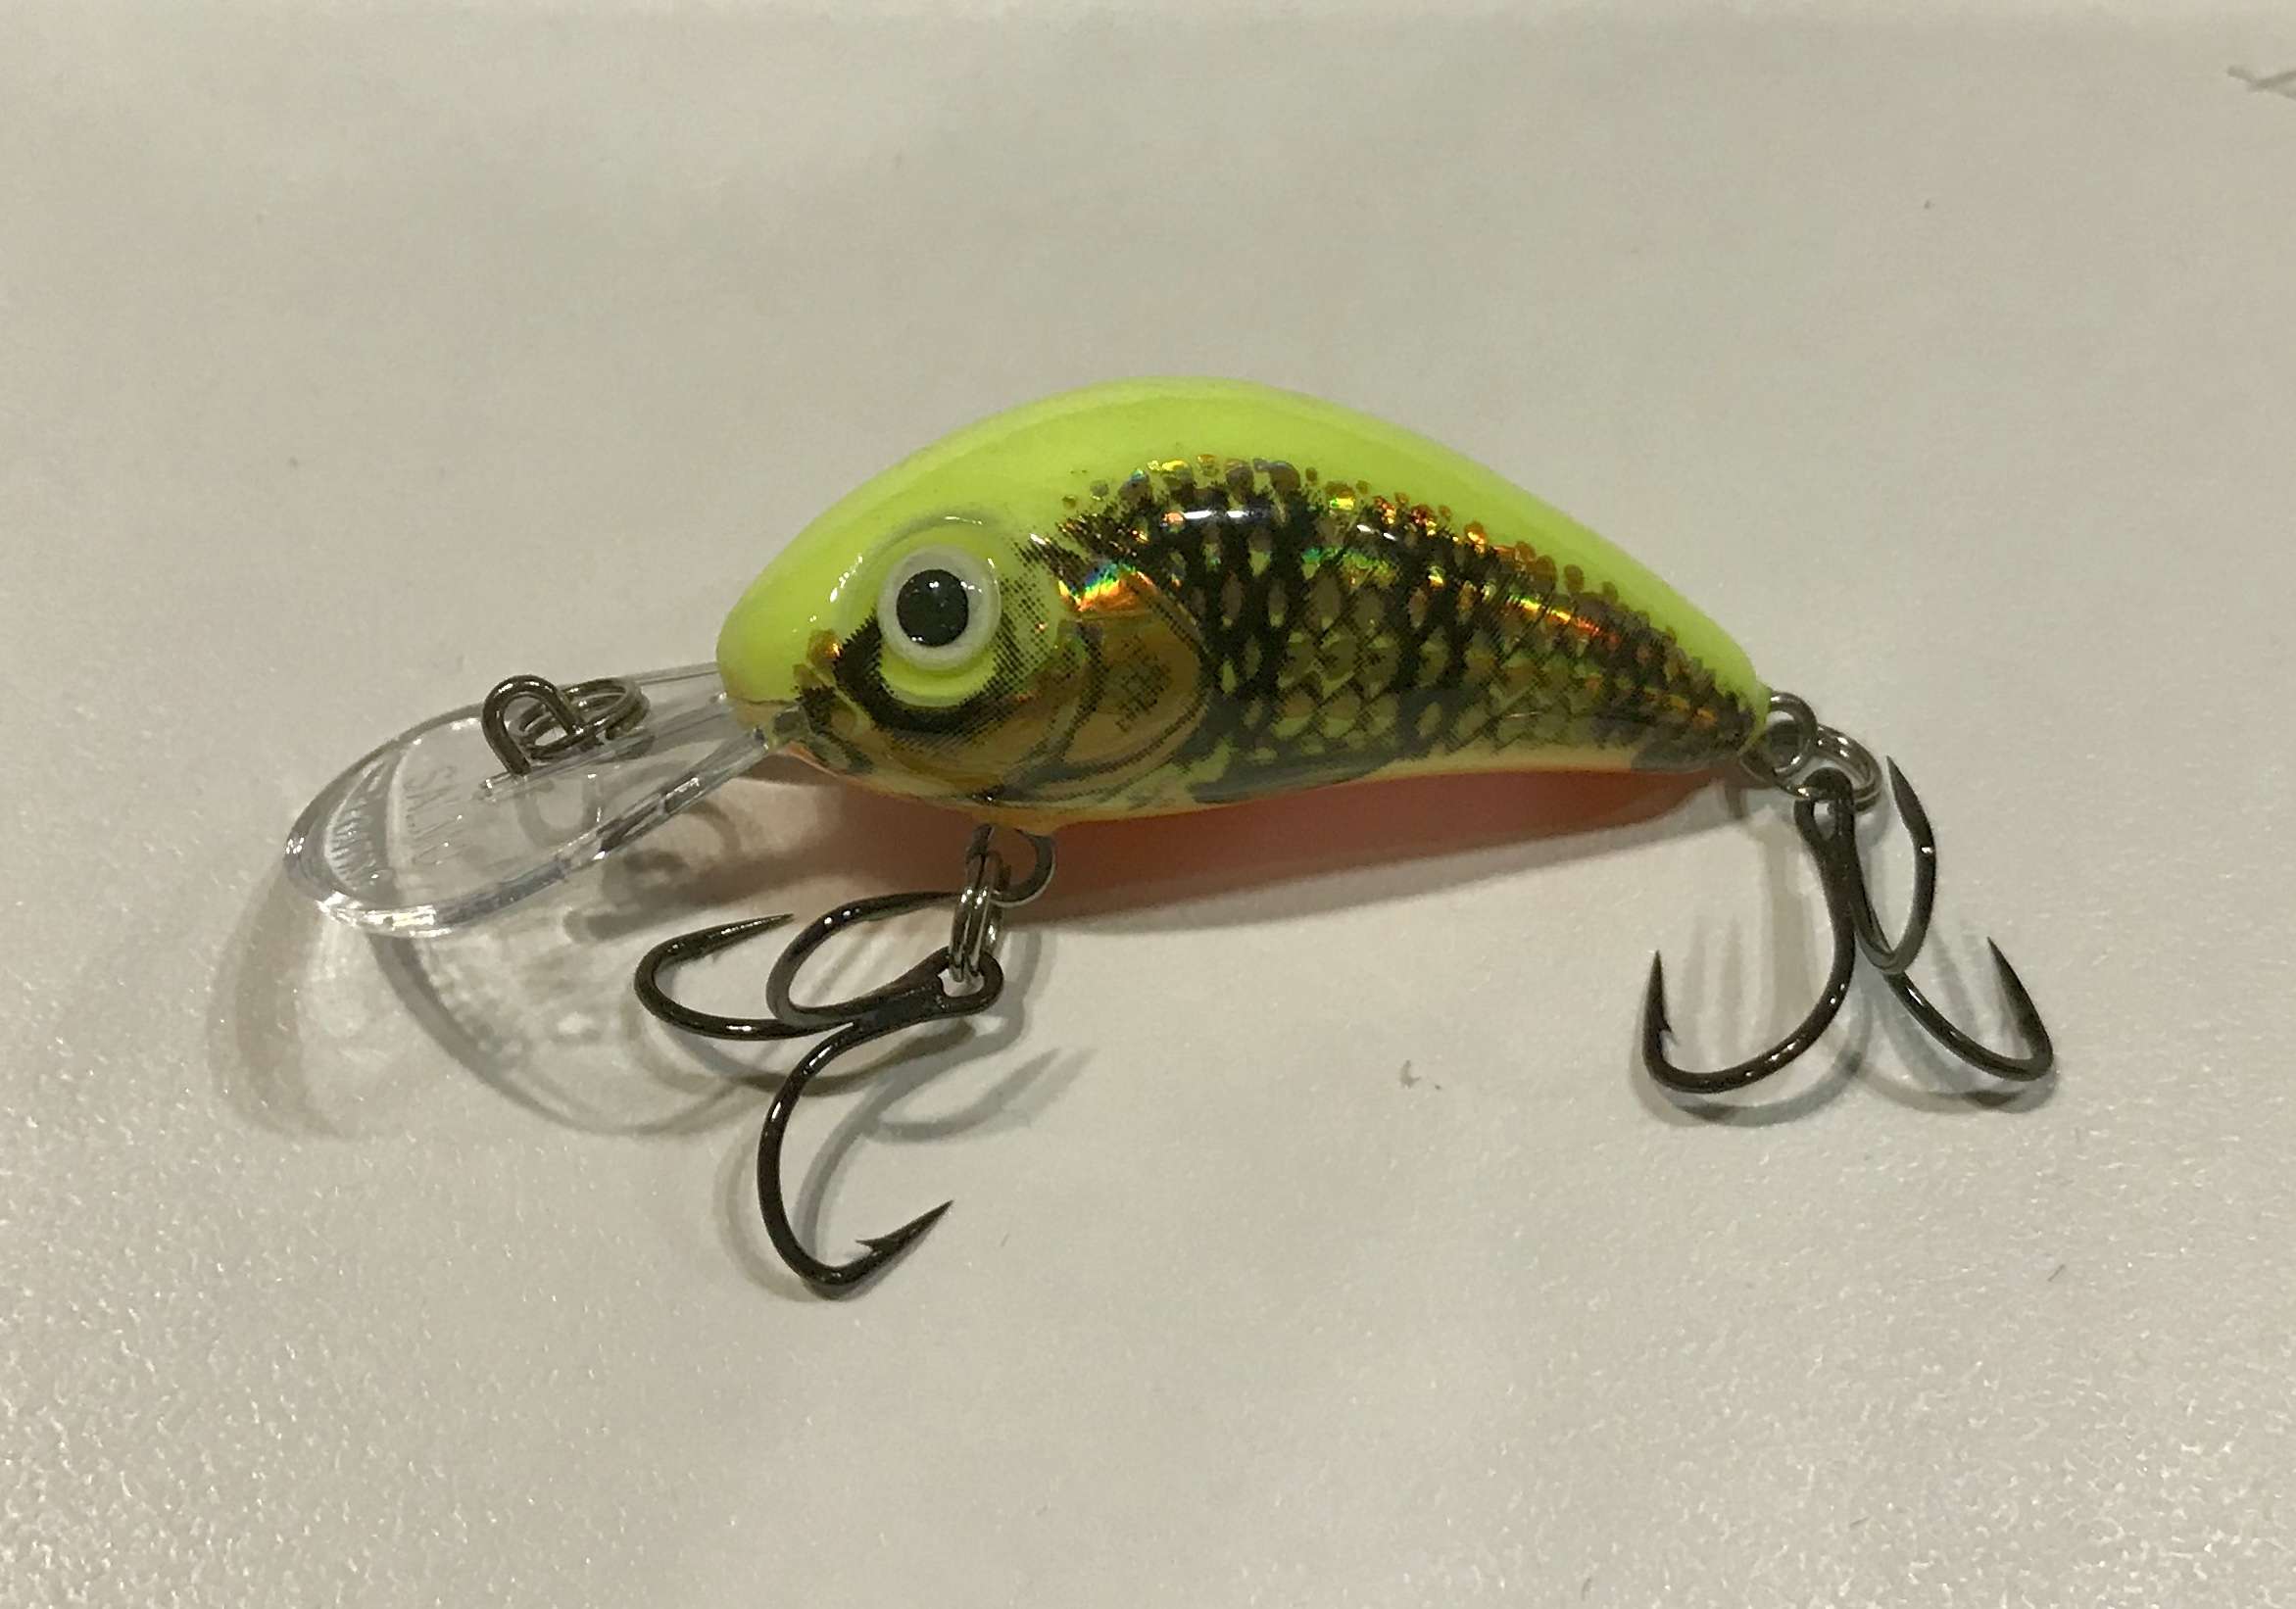 The Salmo Rattlin' Hornet 3.5 is a small-profile is bound to be a demon on ponds, rivers and creeks â and when you find finicky bass on big water, it'll be a fantastic option.